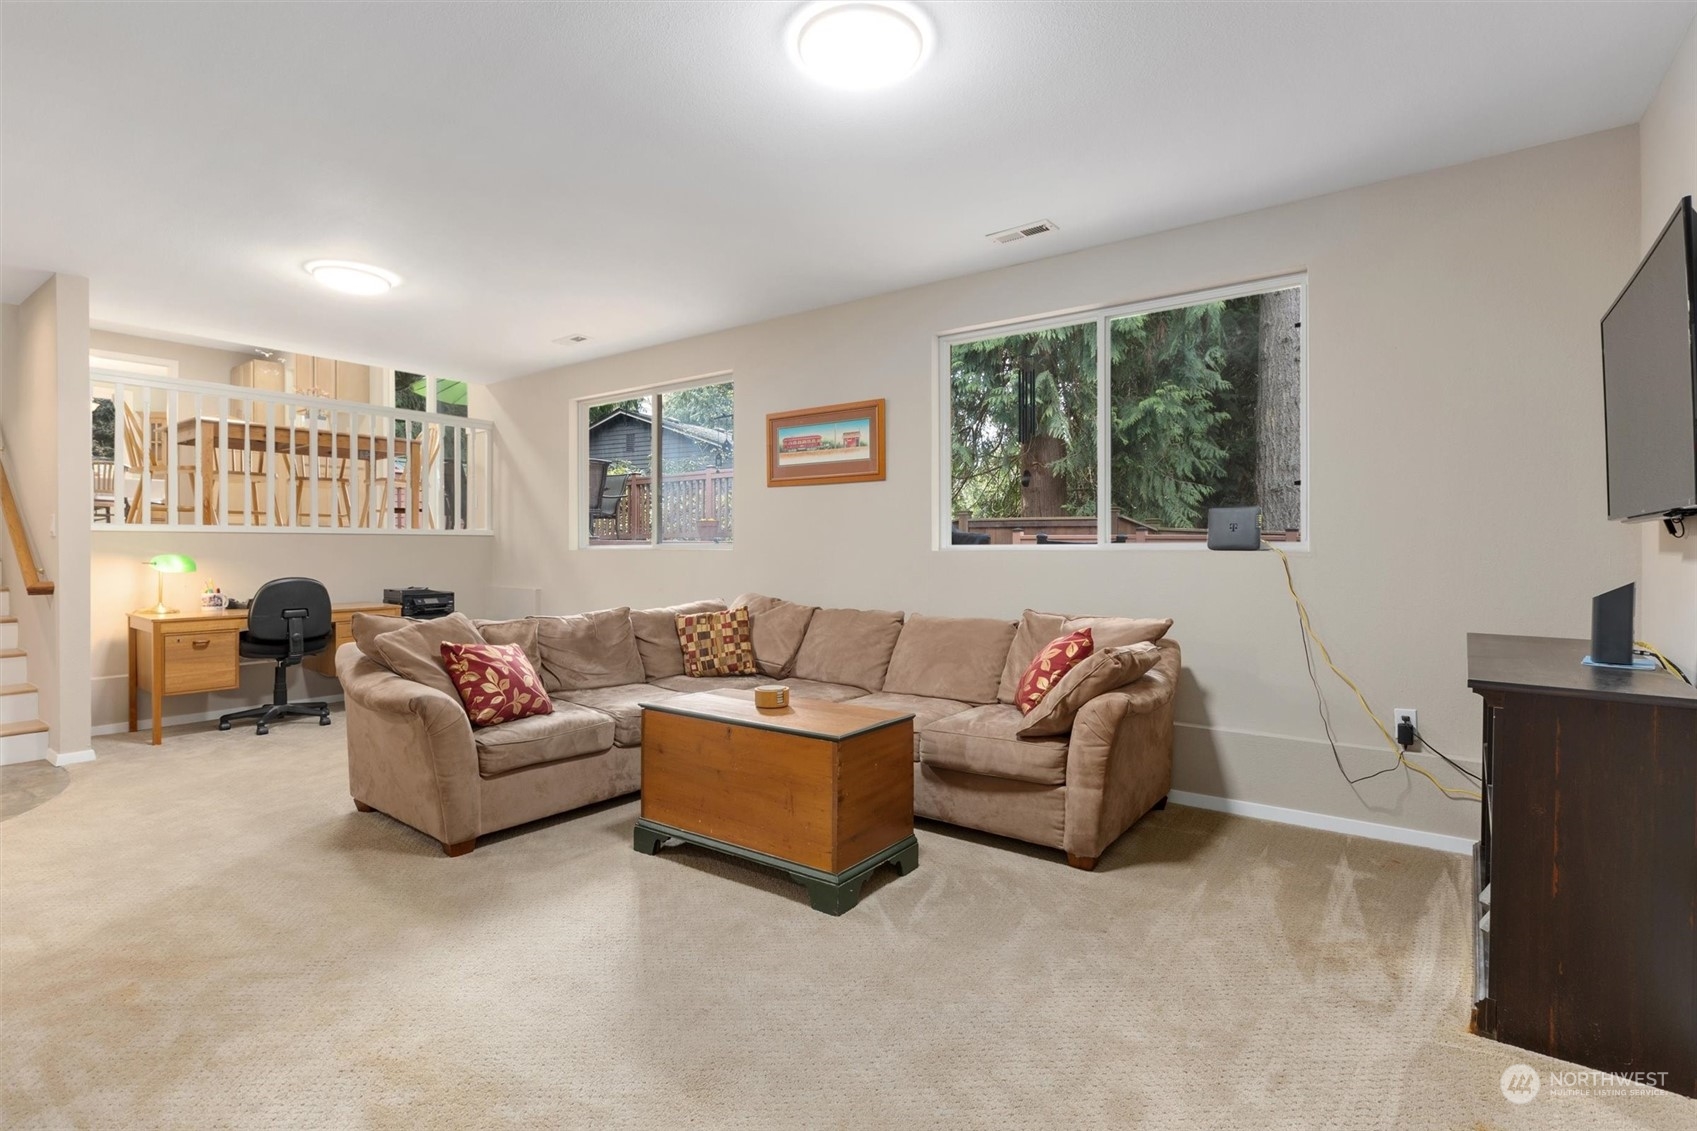 Lower level Rec/Family Room with an office nook.